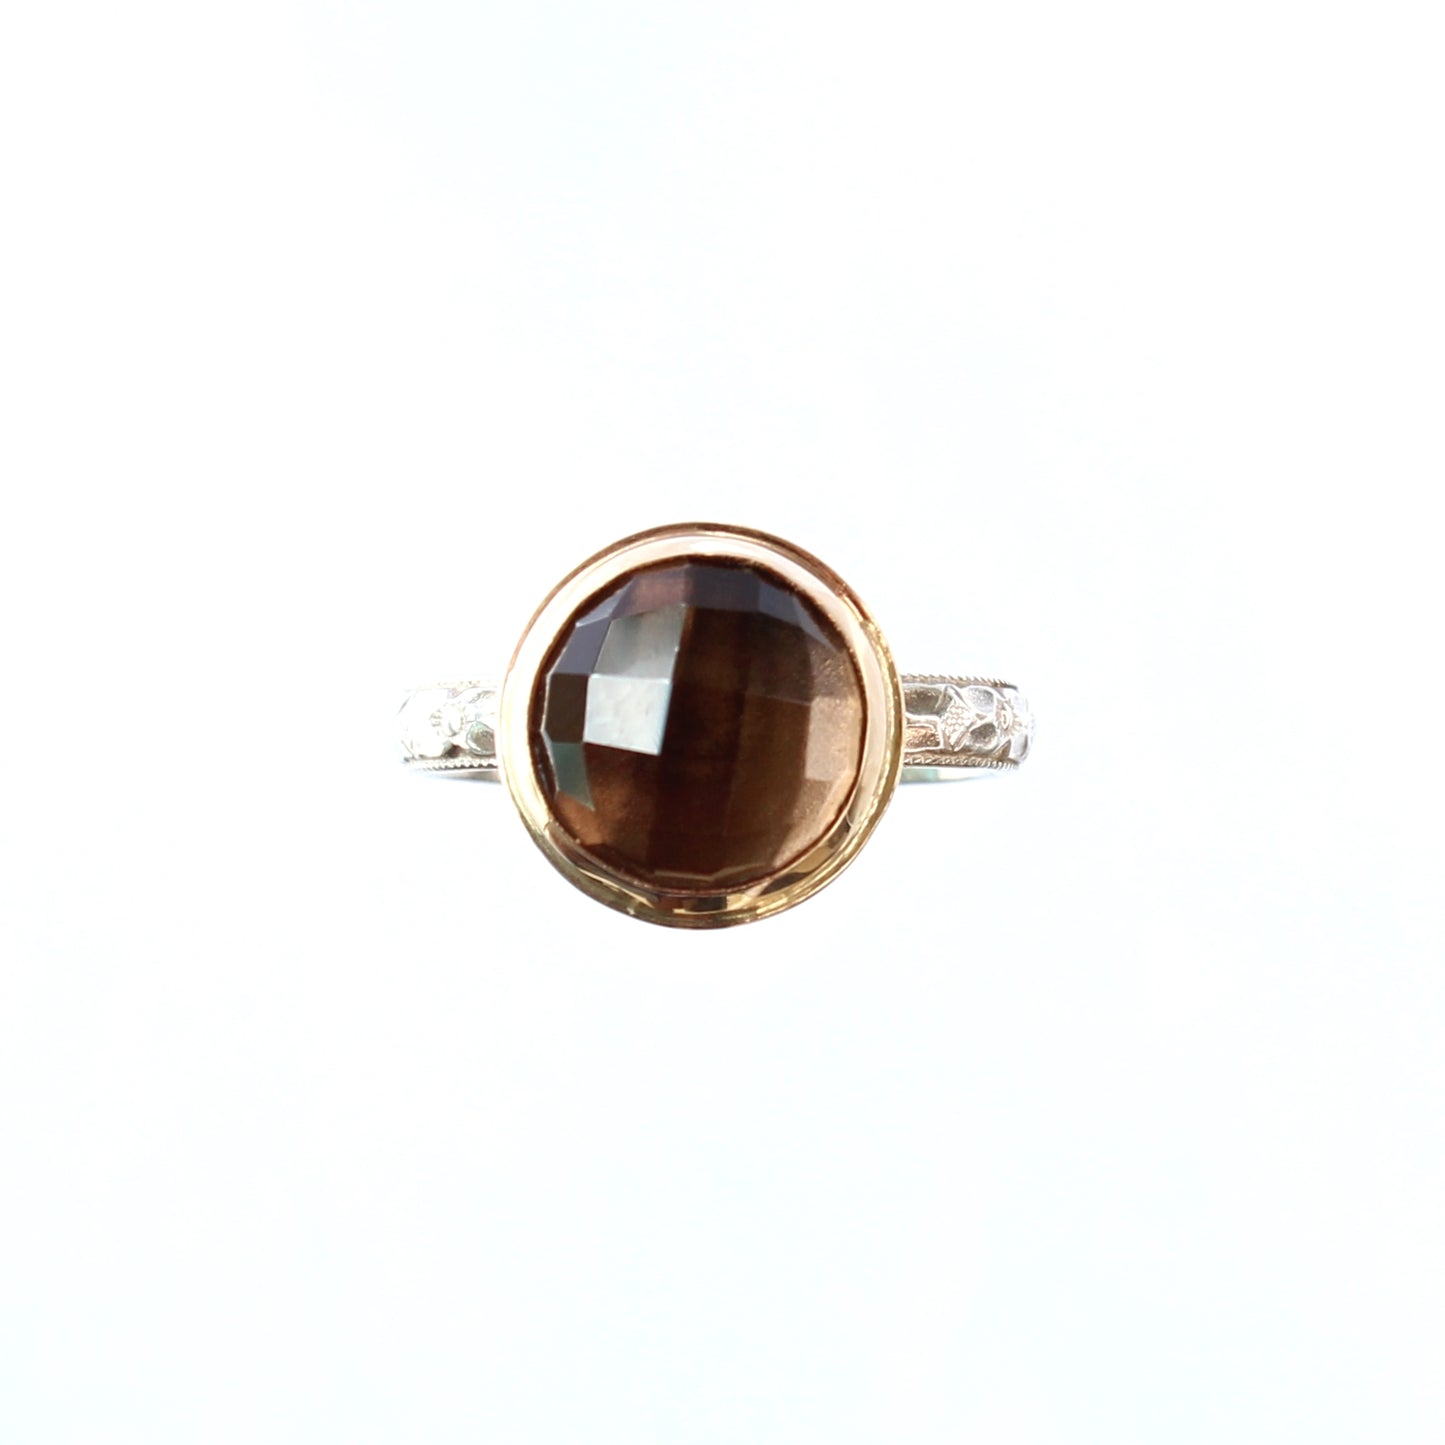 Smoky Quartz Brown Faceted Gemstone set in 14k Gold Bezel with a Patterned Sterling Silver Band